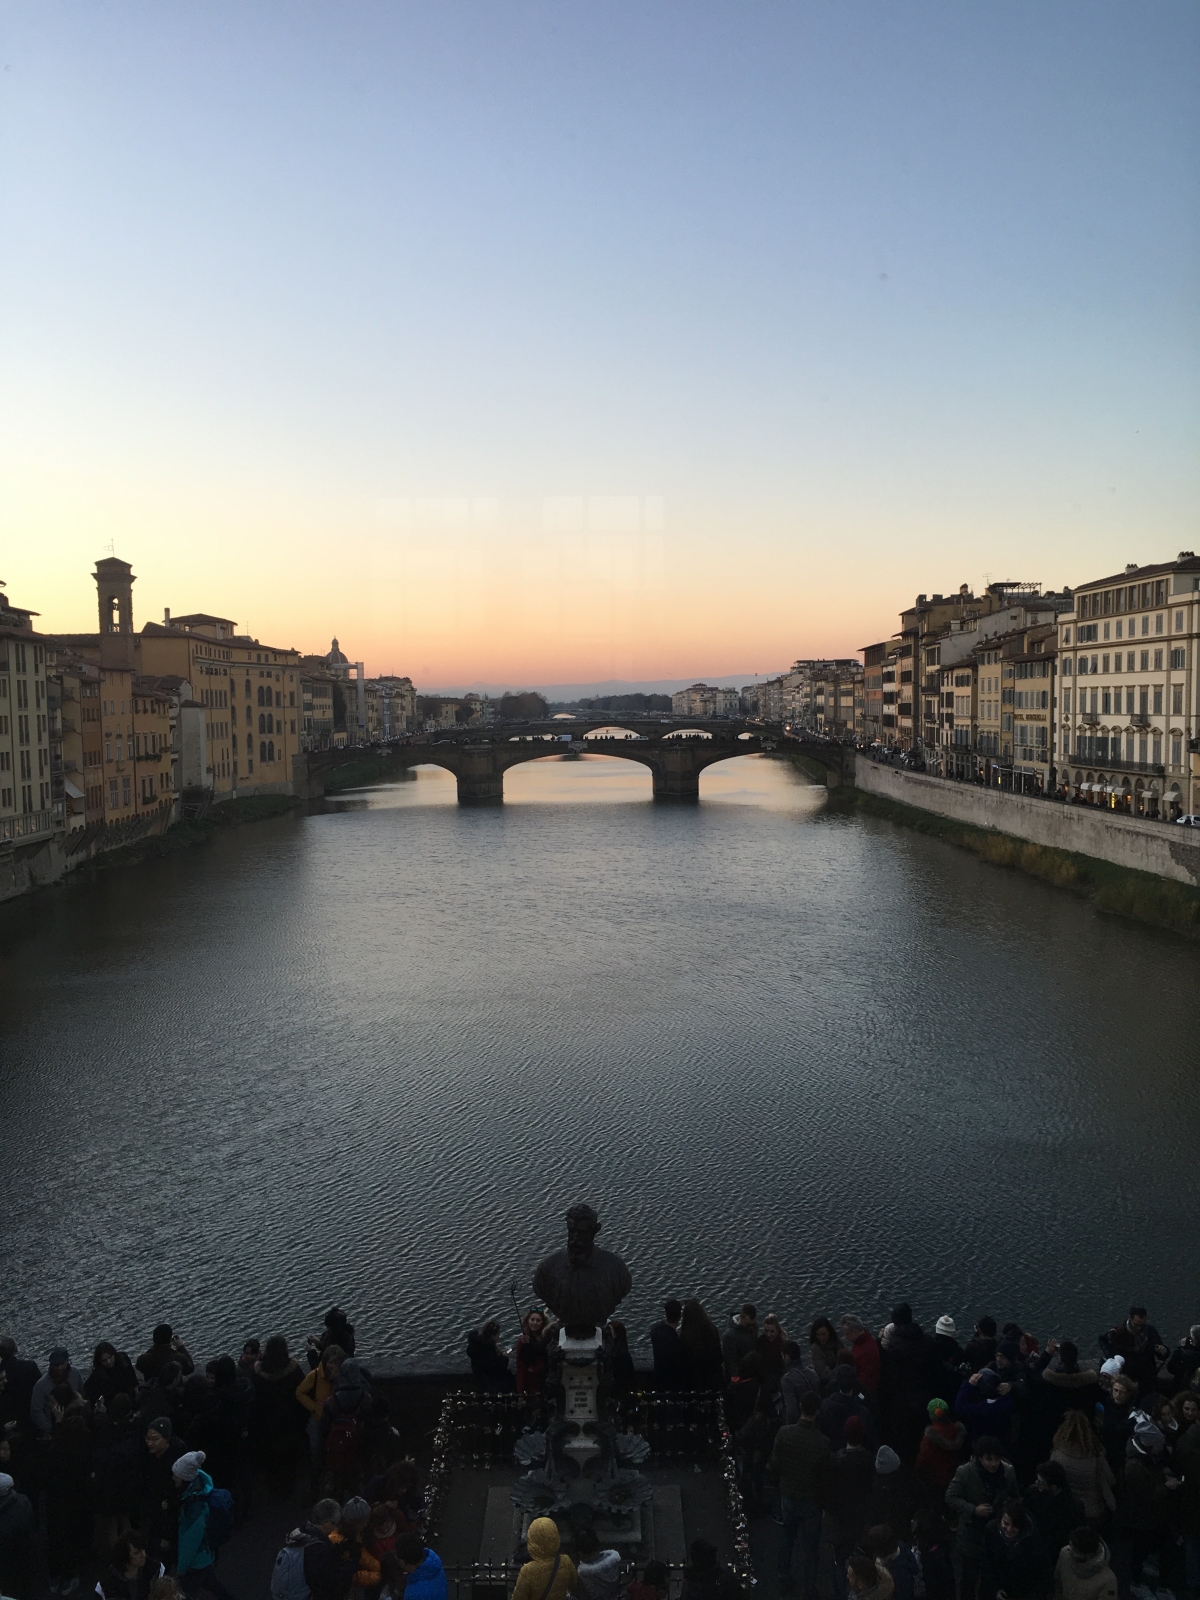 The Vasari view from above the Ponte Vecchio